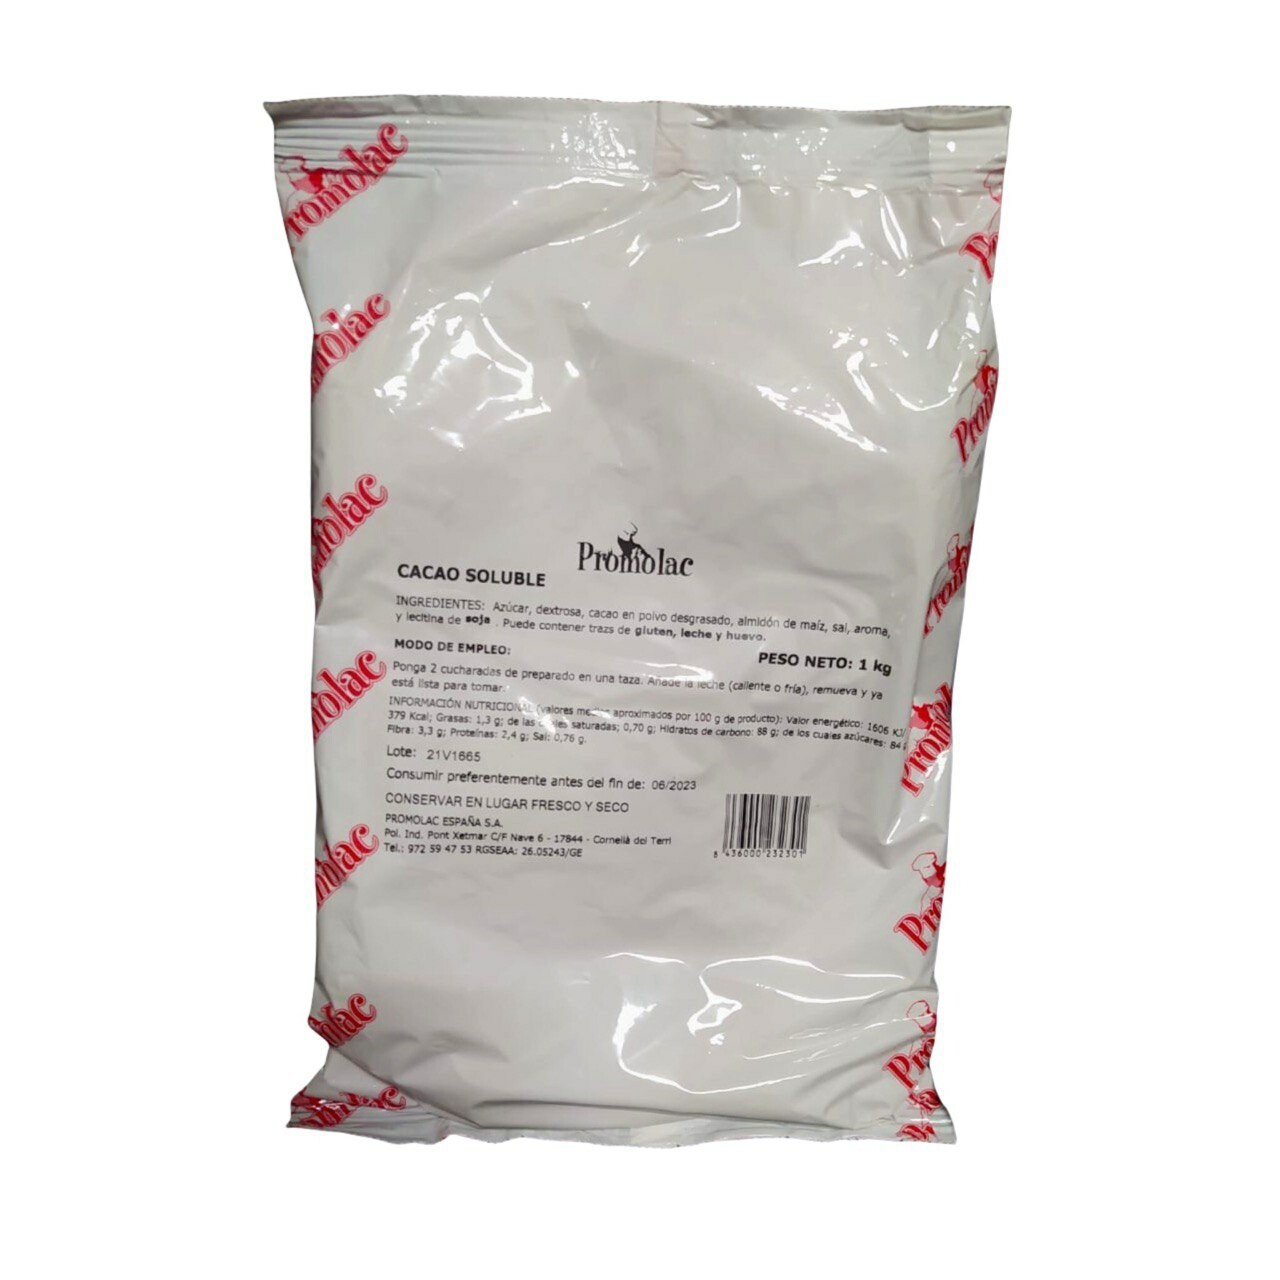 Chocolate- Cacao soluble 1kg